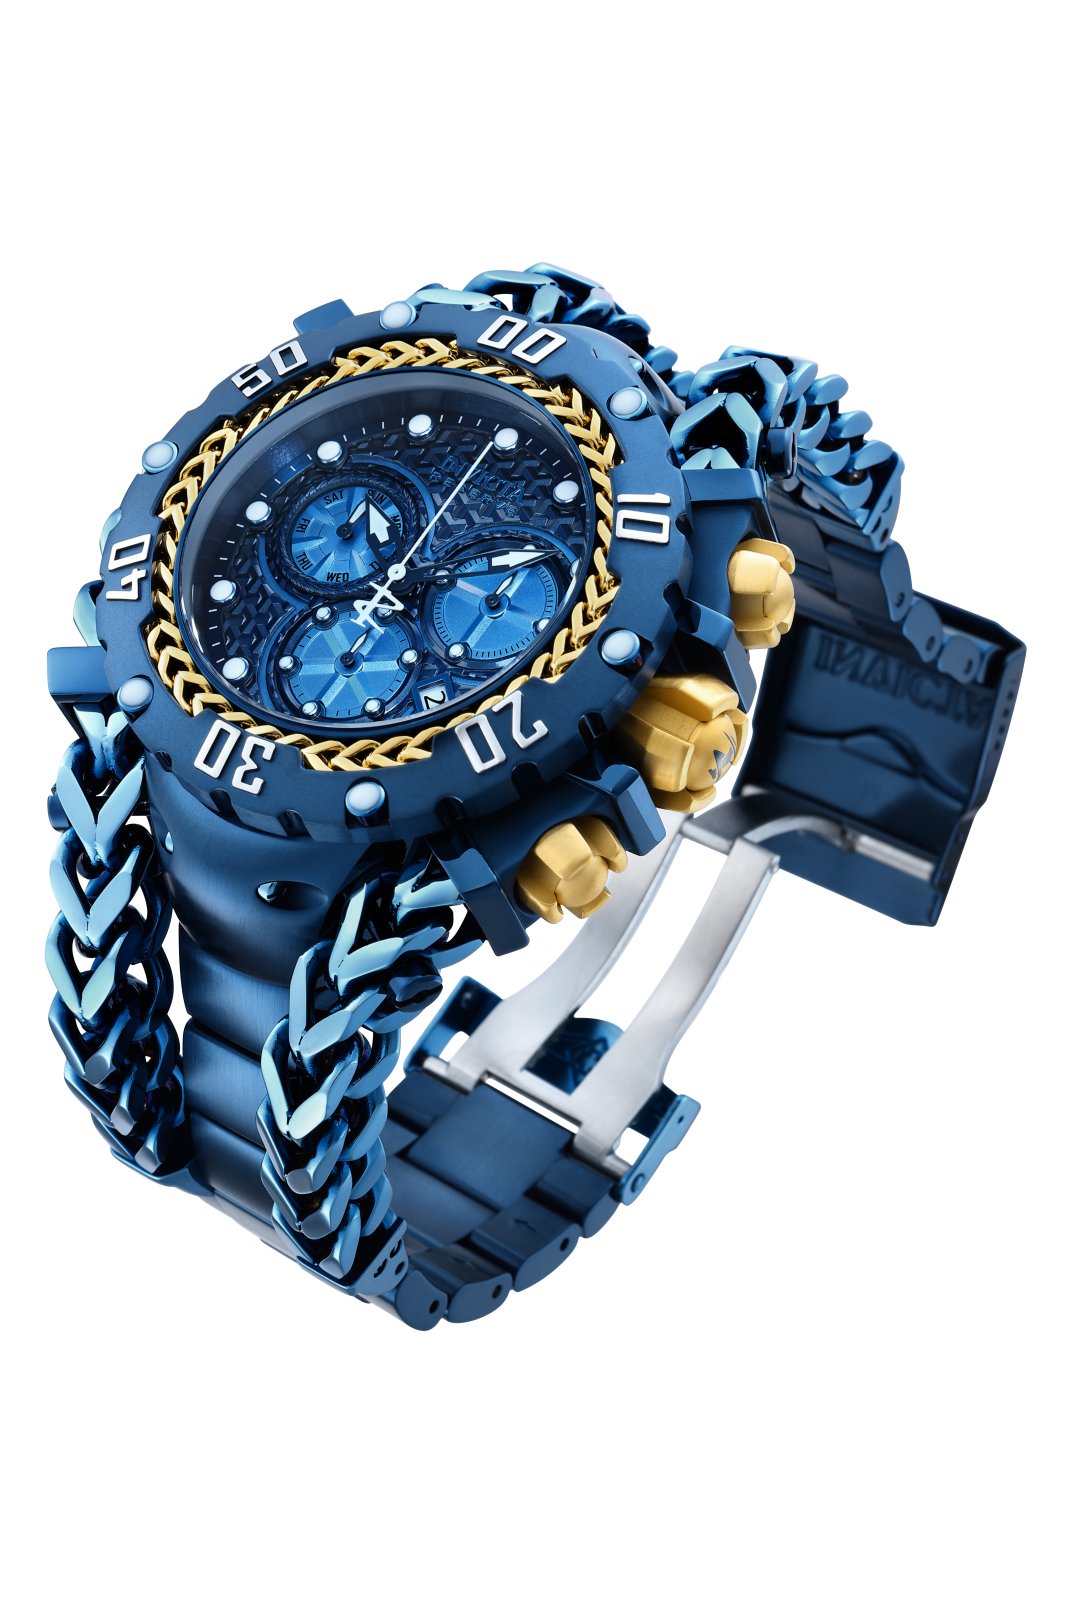 Invicta Watch Gladiator 36964 Official Invicta Store Buy Online!